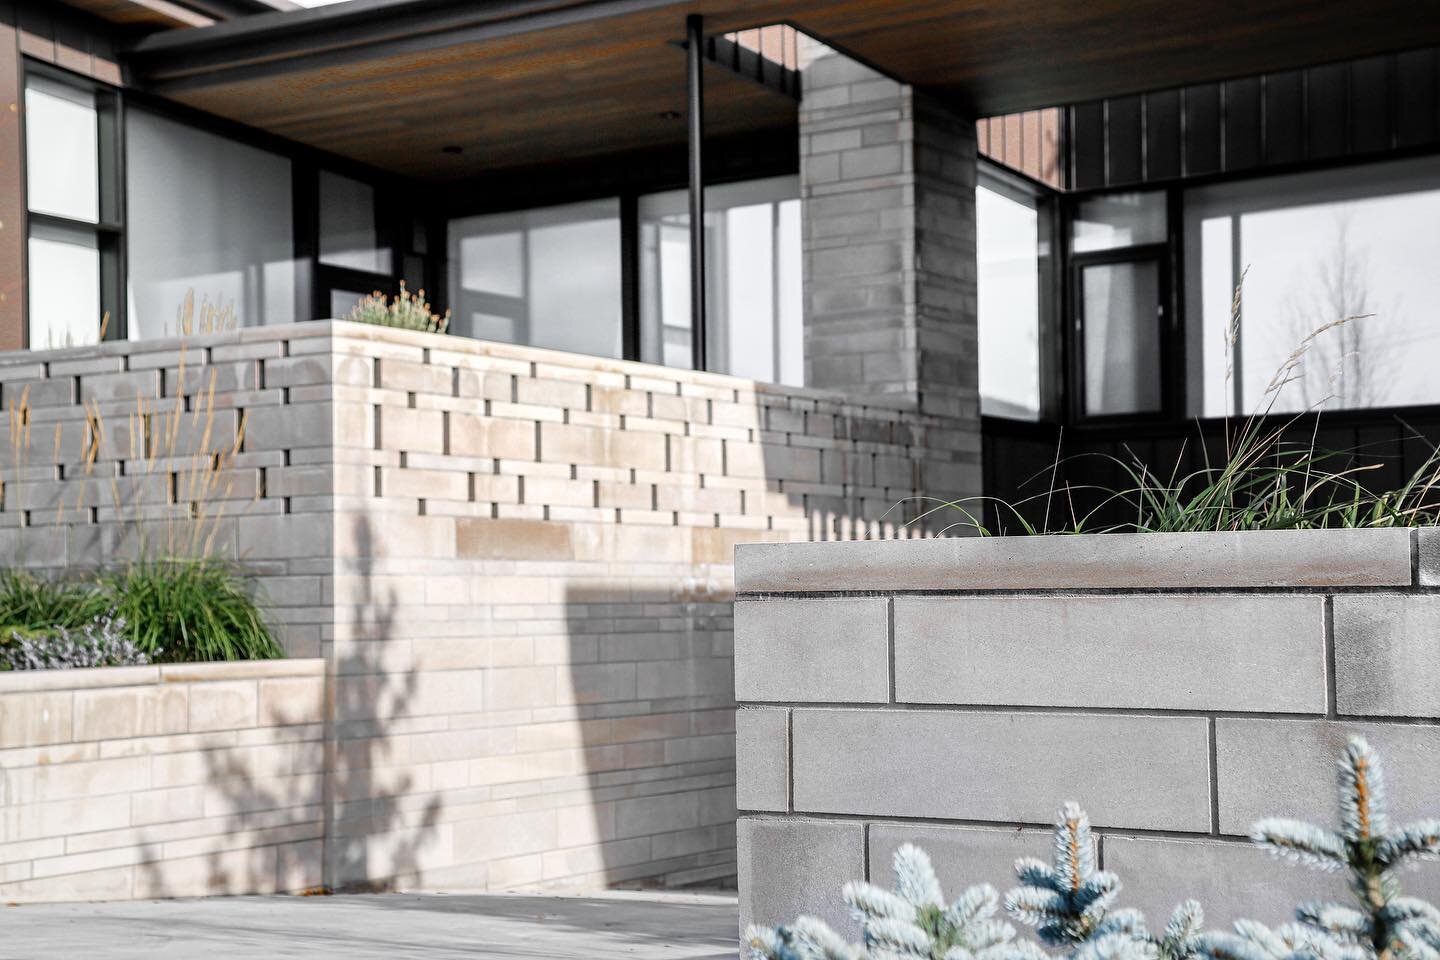 Crisp and clean! 

The perfect combination to compliment this elegant home. 

What does your dream home look like? 

.
.
.
.
.
.
.
.
.
.
#calgary 
#yychomes 
#masonry 
#stonemasonry 
#yycmasonry 
#calgaryhomes 
#yycnow 
#calgarysmallbusiness 
#exteri